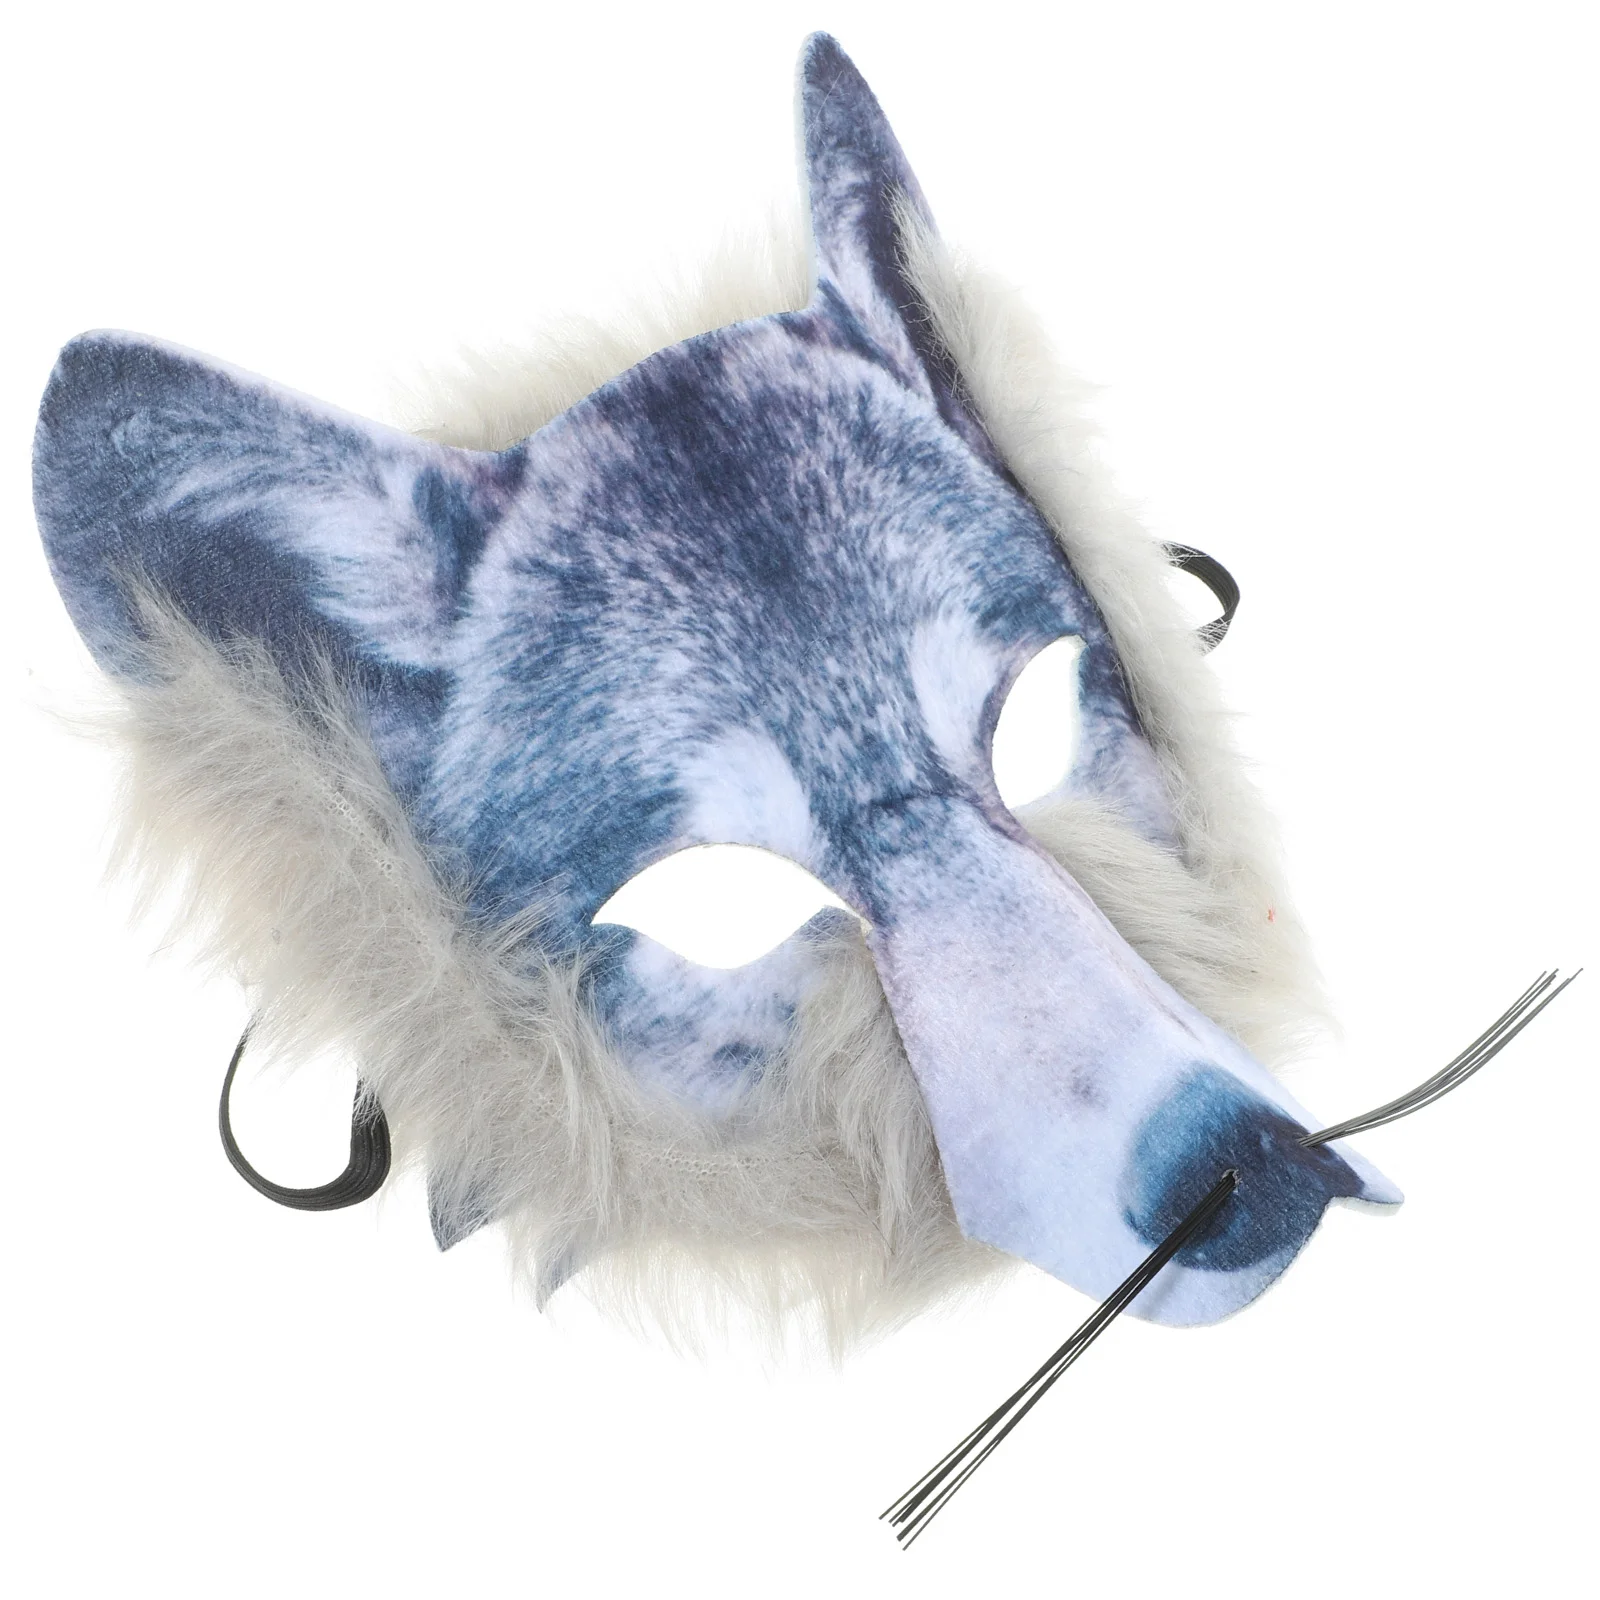 

Creative Masquerade Masks Scary Wolf Mask Cosplay Prop Halloween Party Supply